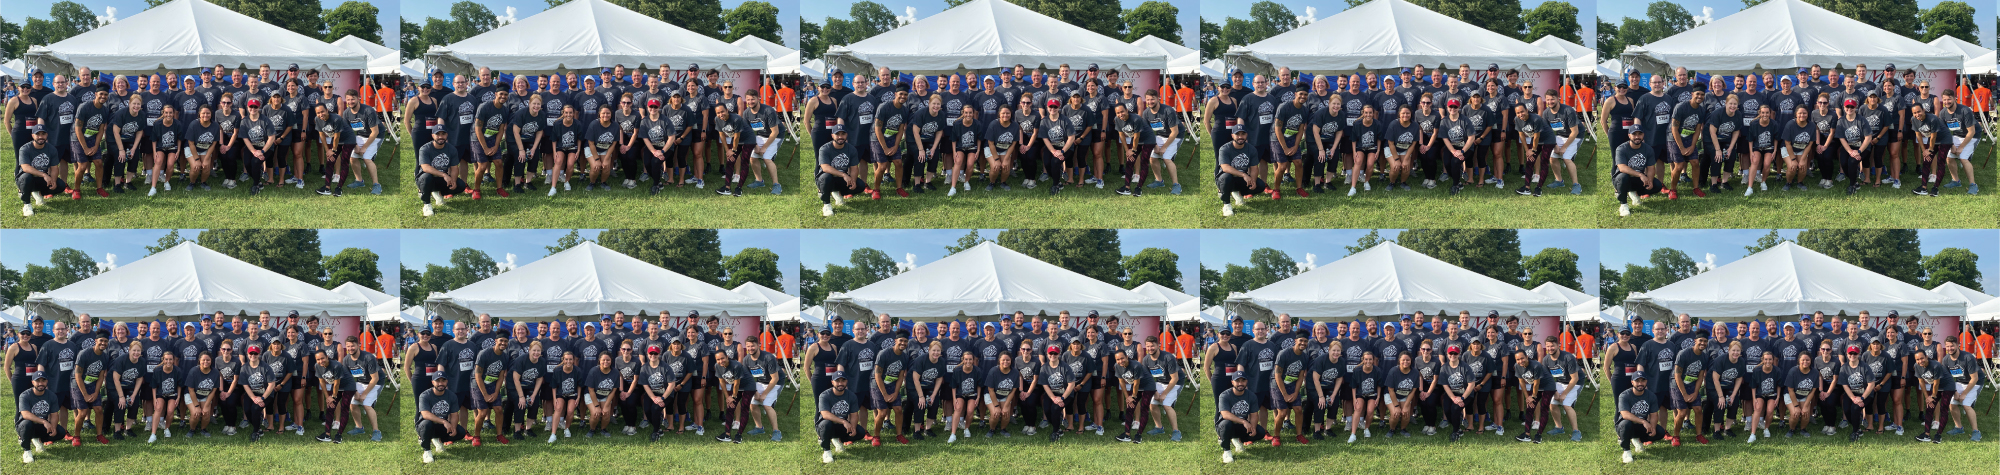 Merchants Insurance Group Participates in the Corporate Challenge!